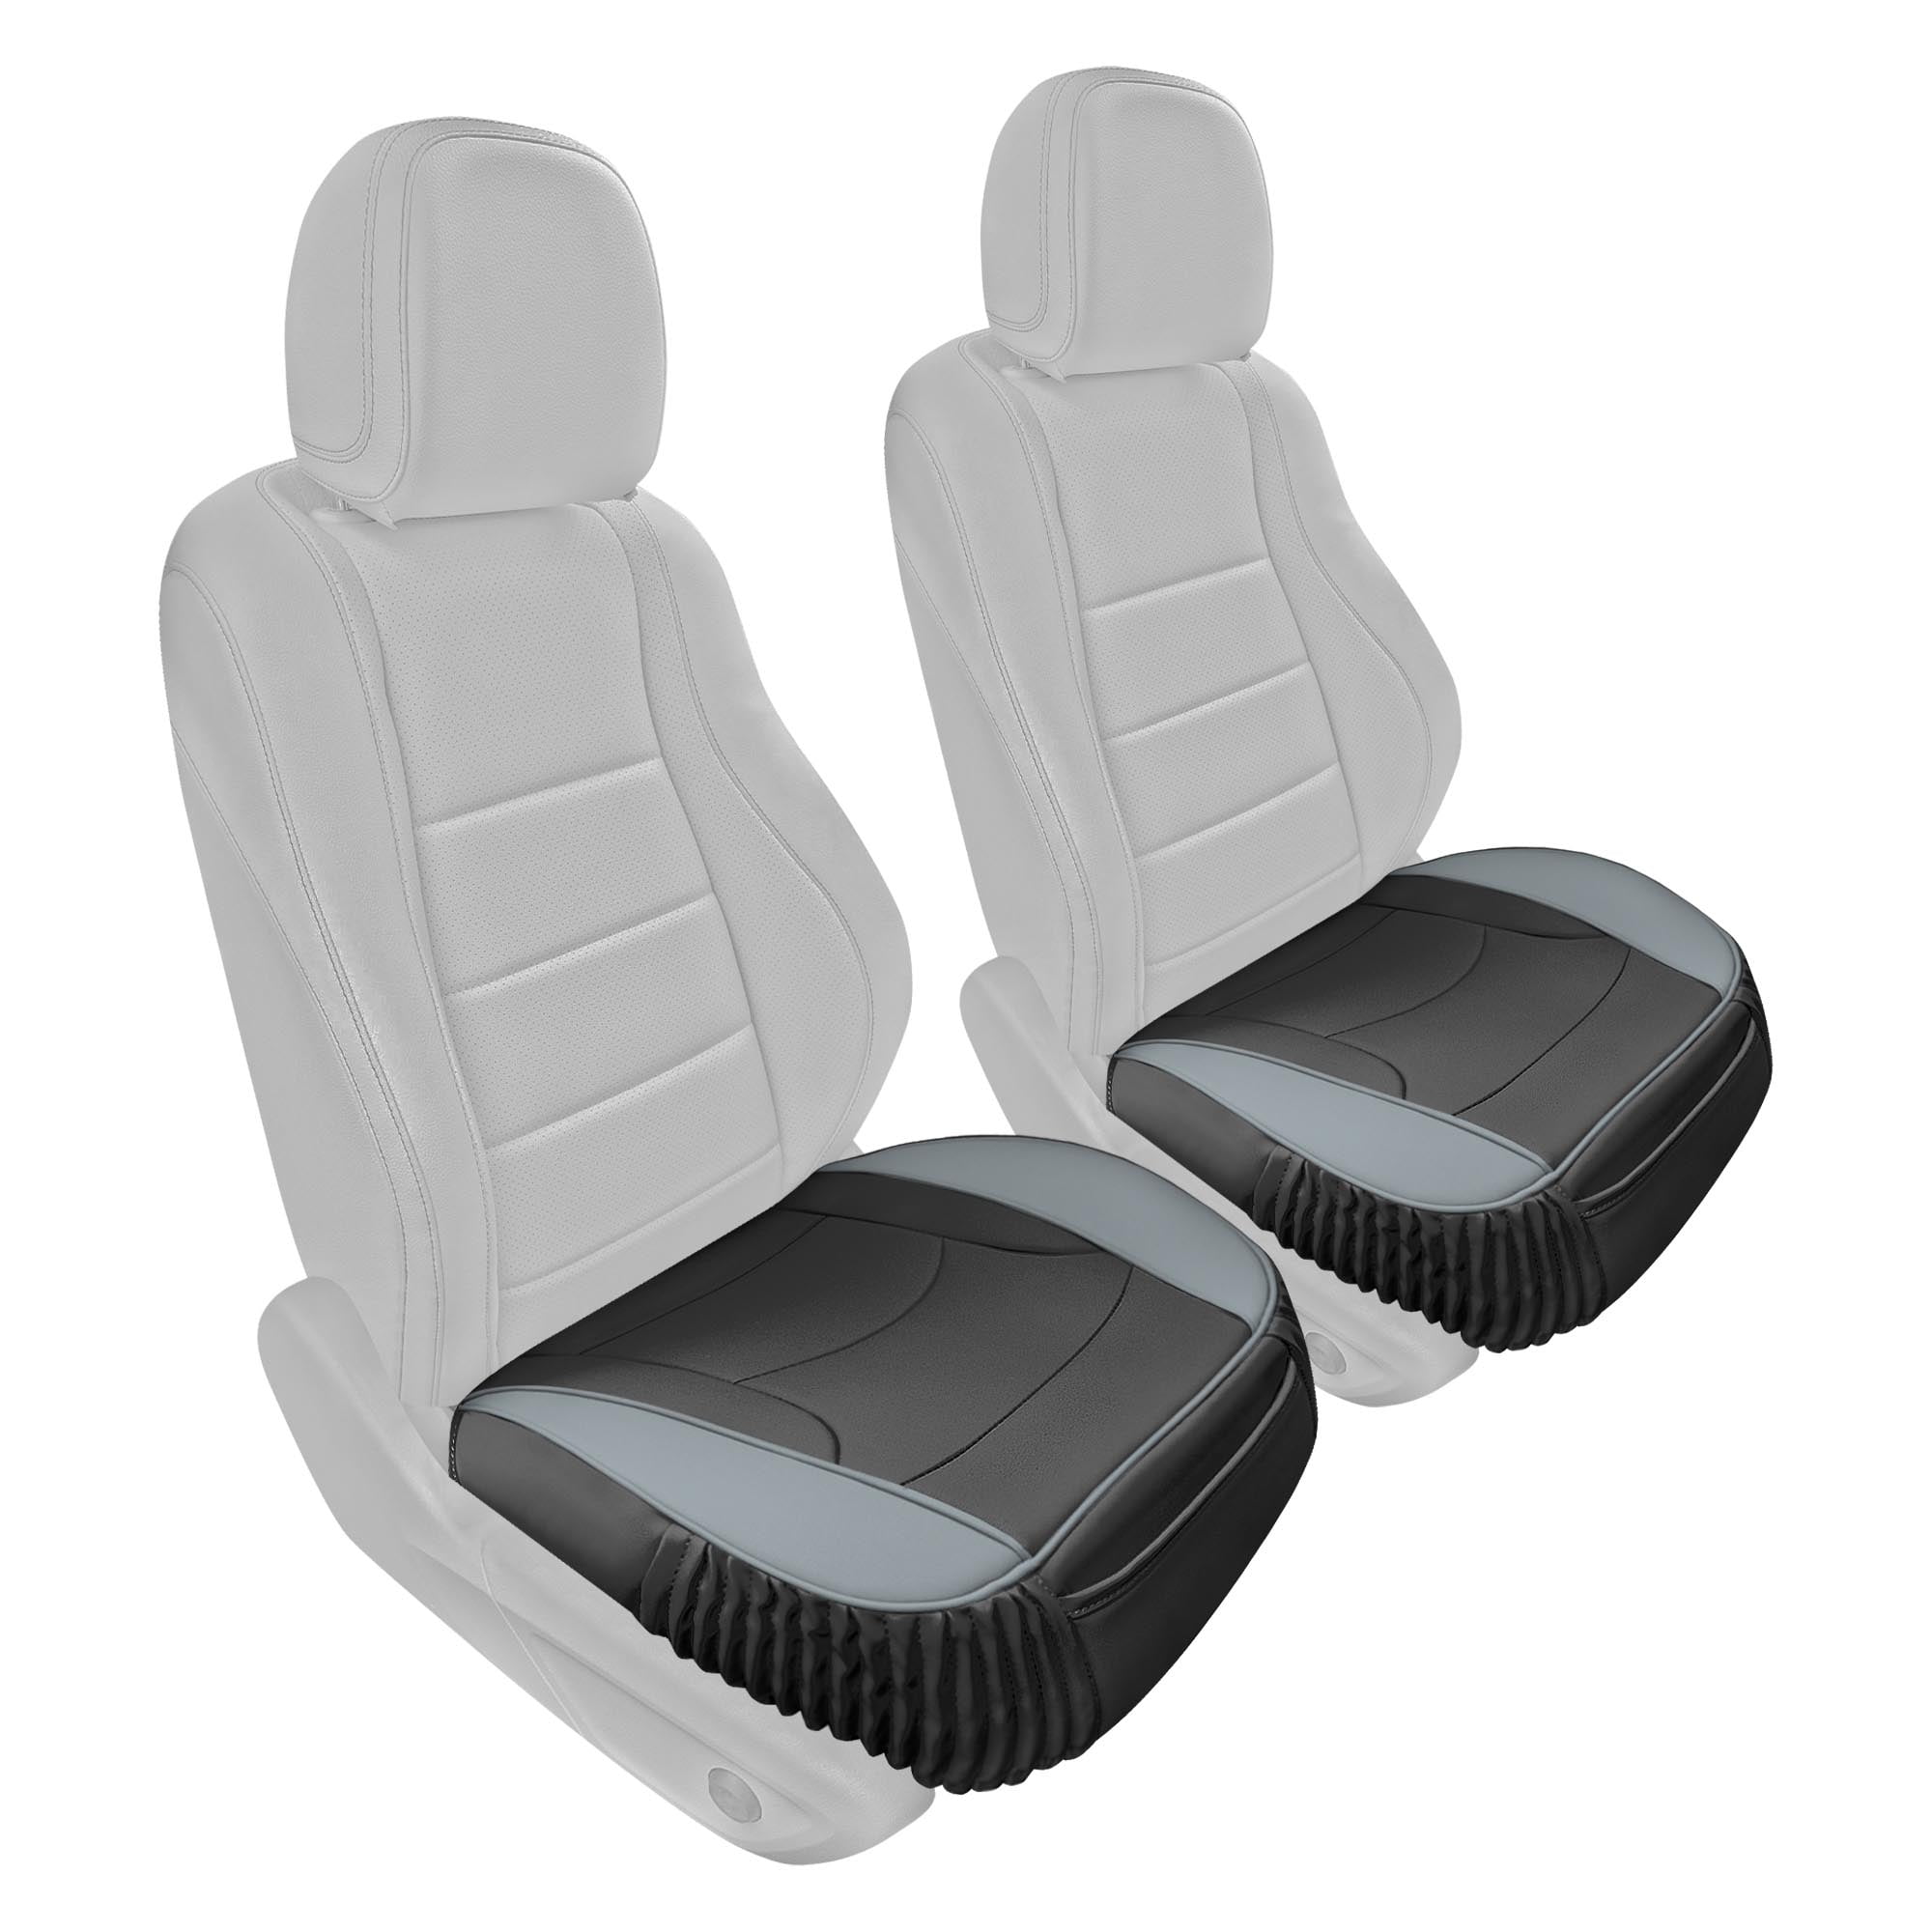 Fuzzy Car Seat Covers